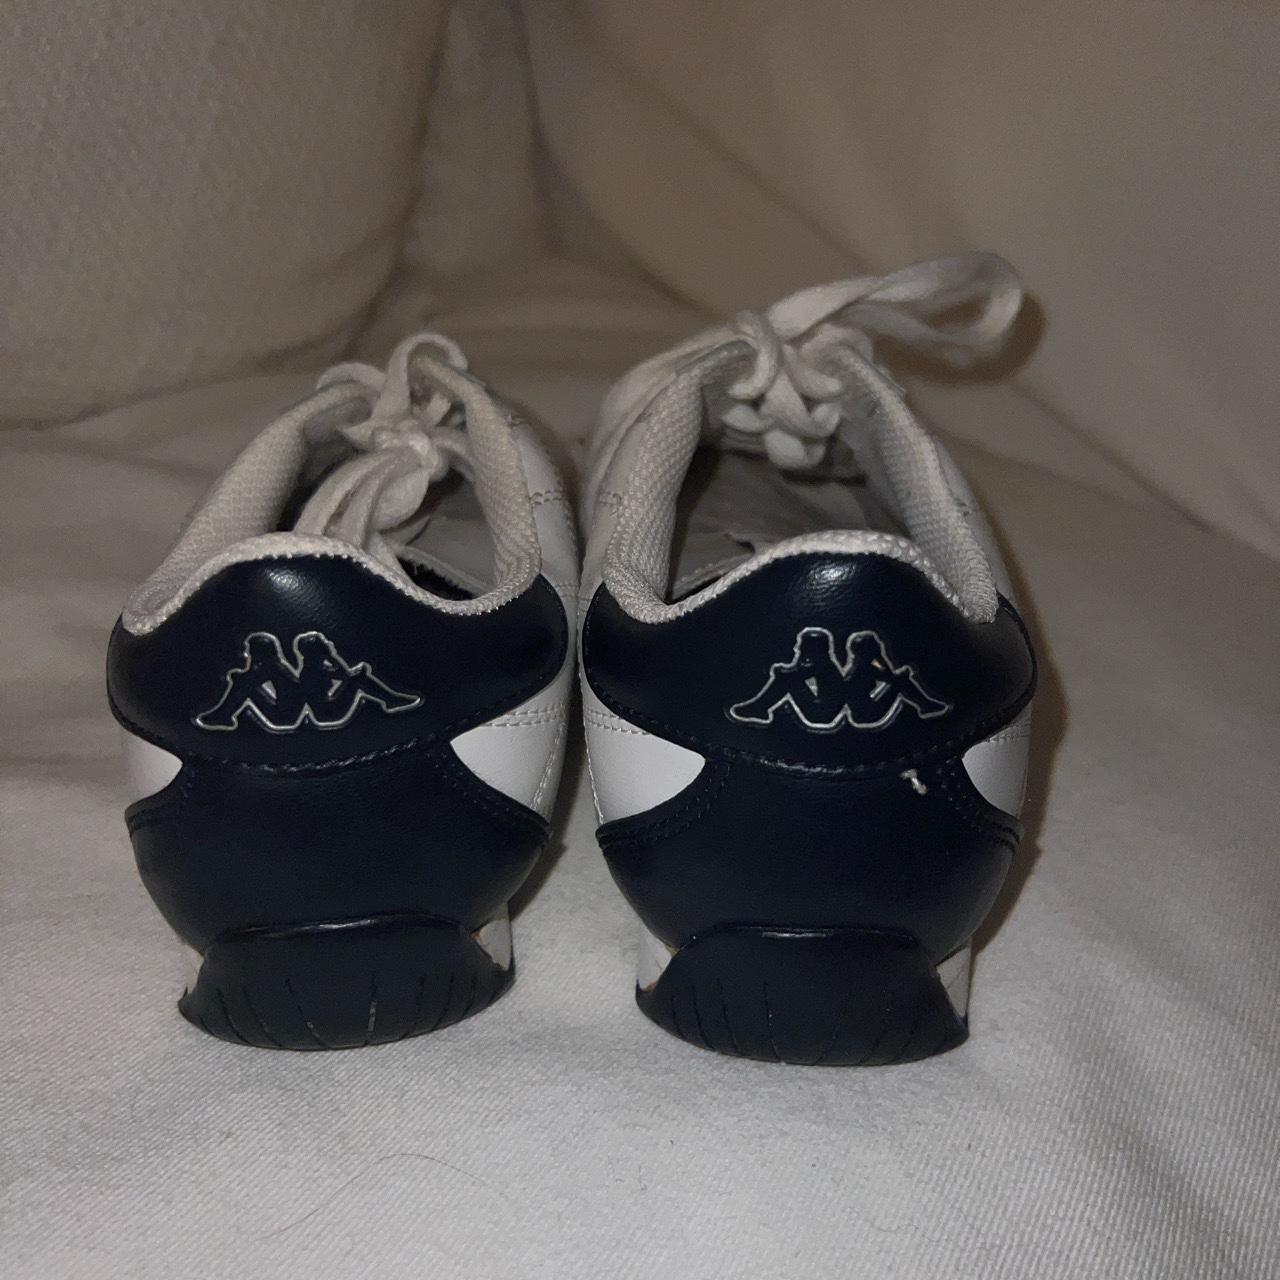 Purchases in Depop Vintage Kappa sneakers! - Slovenia. Size 39